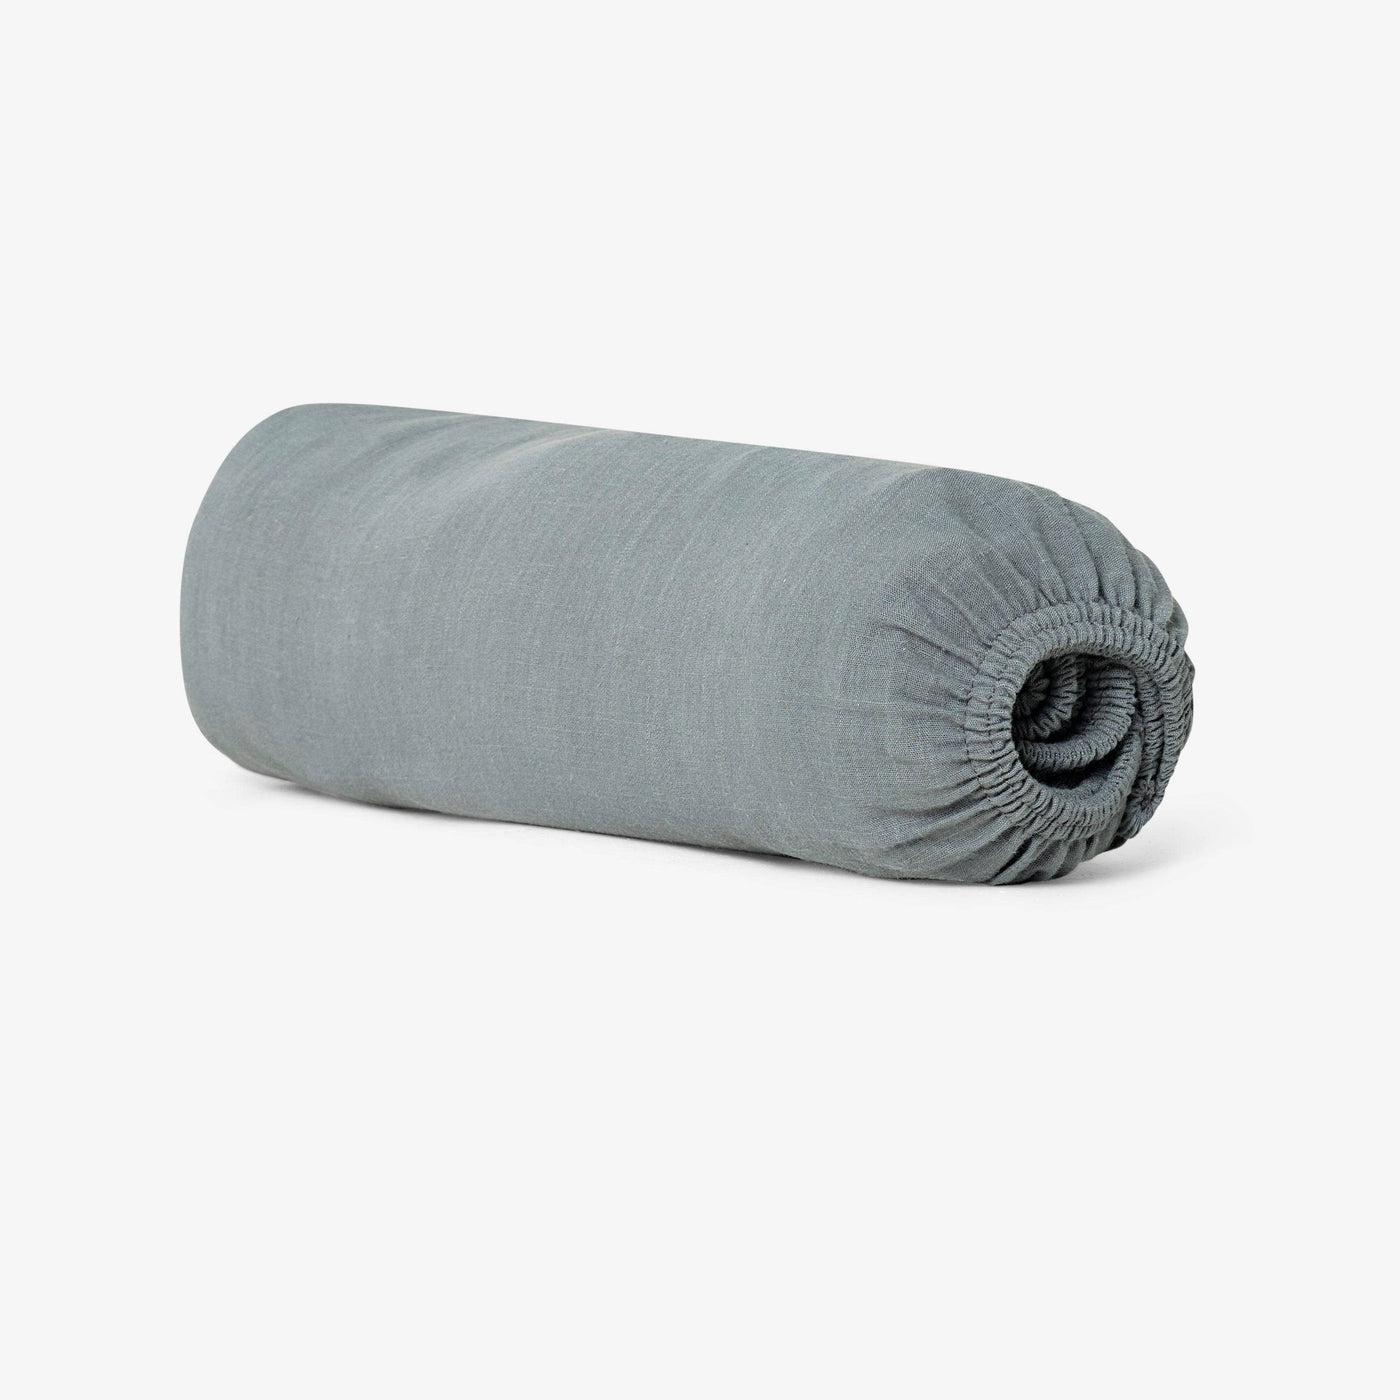 Ruby 100% Turkish Cotton Fitted Sheet, Anthracite Grey, Double Size Bed Sheets sazy.com